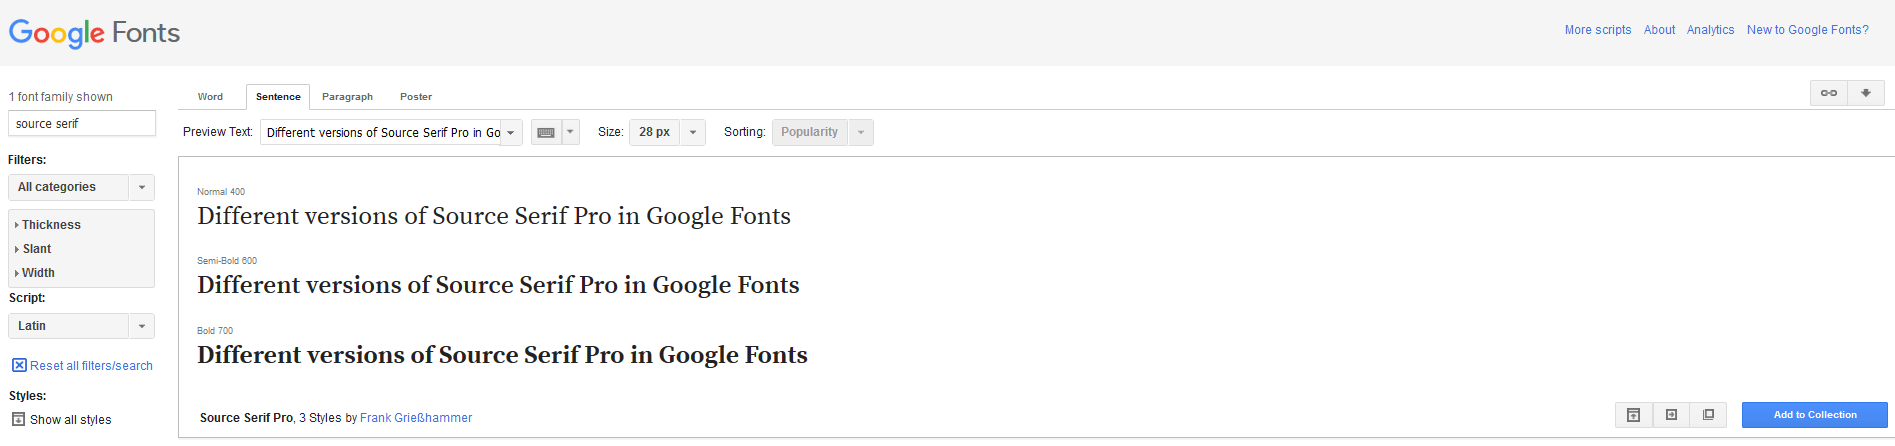 Different versions of Source Serif Pro in Google Fonts